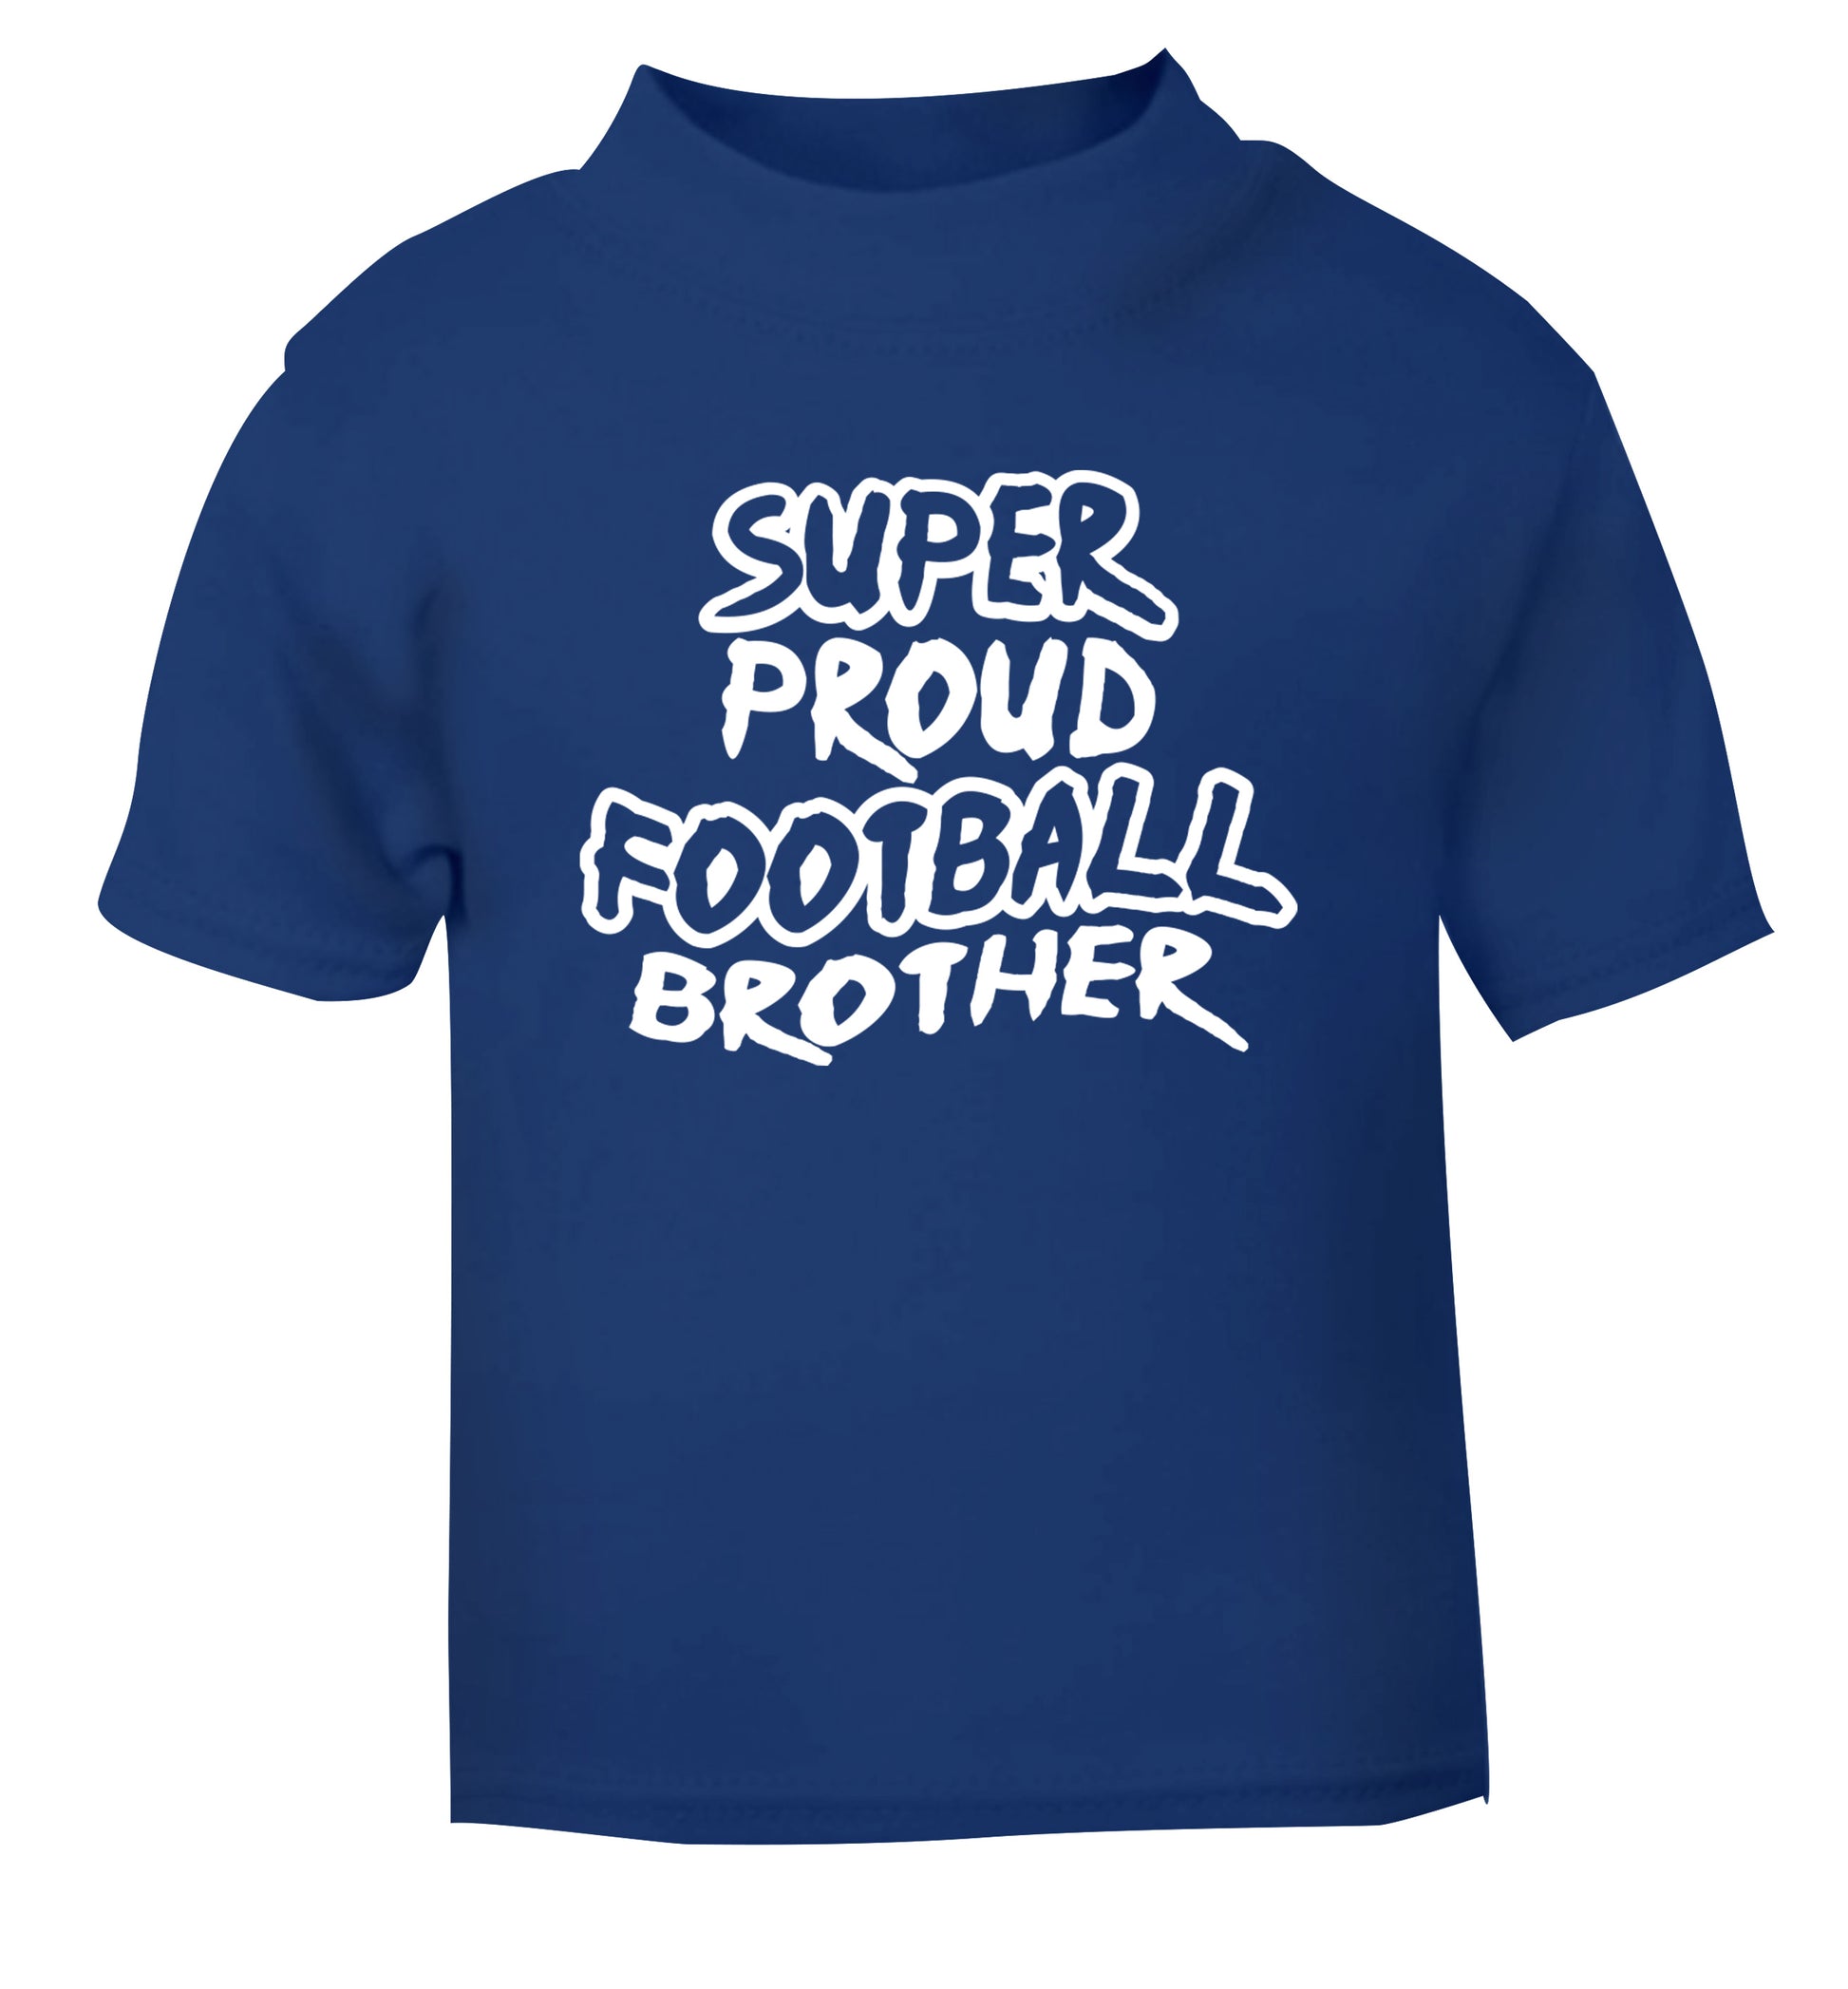 Super proud football brother blue Baby Toddler Tshirt 2 Years